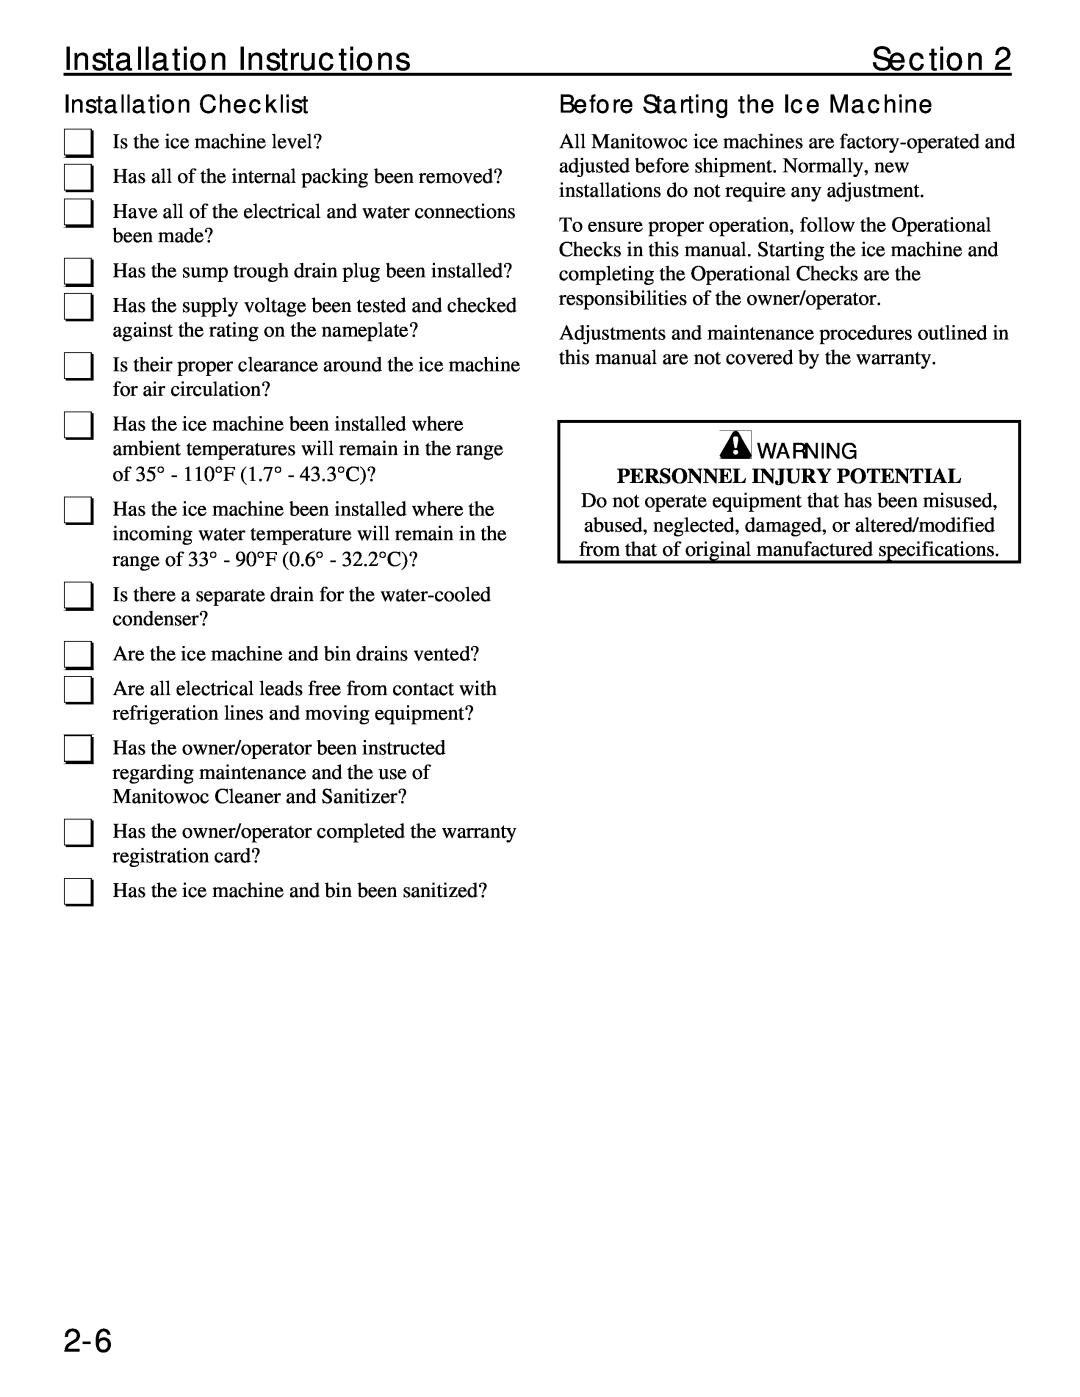 Manitowoc Ice Q 1800 manual Installation Checklist, Before Starting the Ice Machine, Personnel Injury Potential, Section 